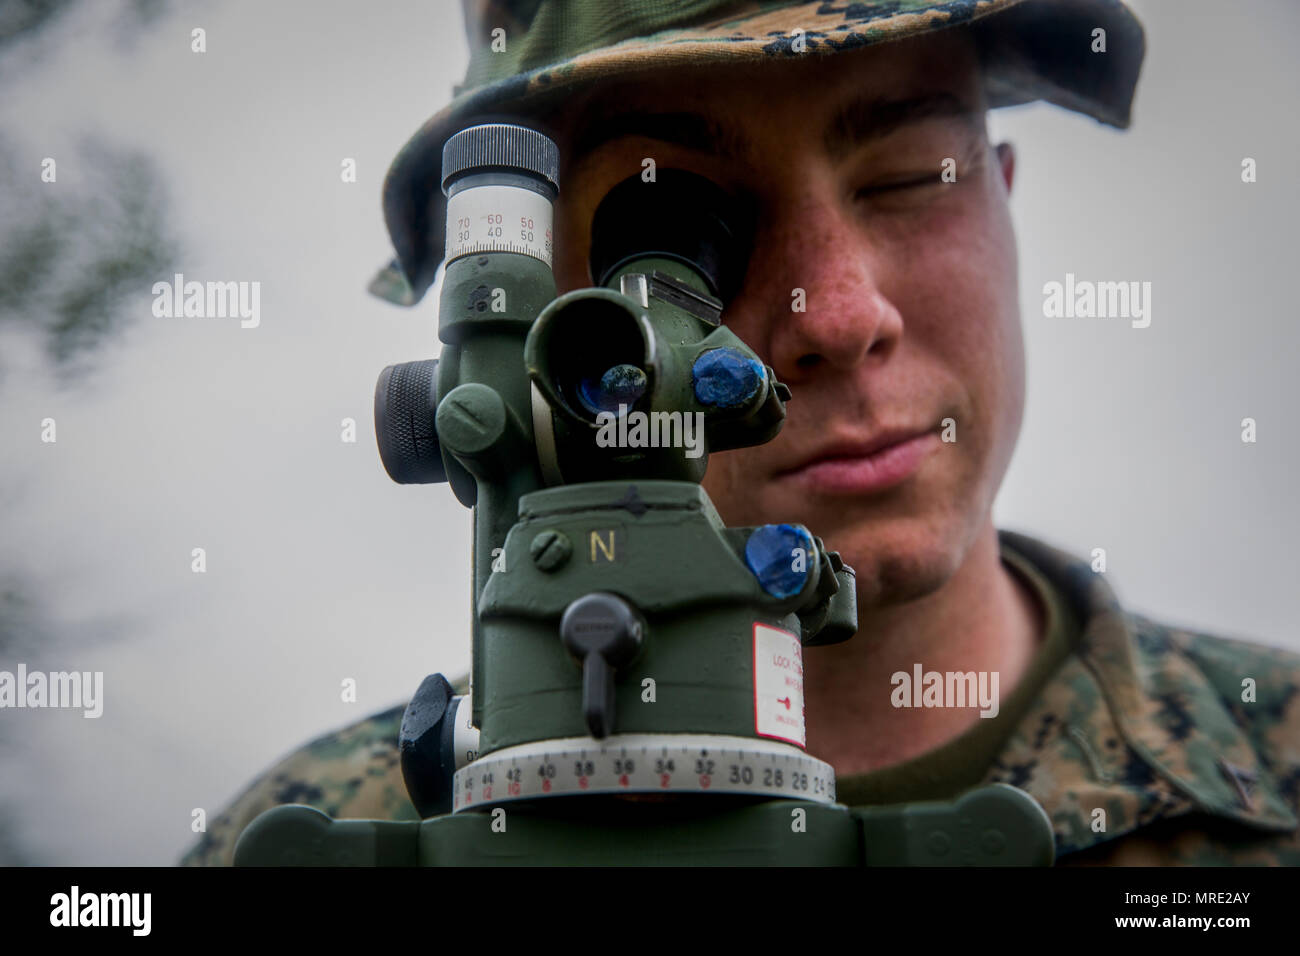 A fire direct controlman with Black Sea Rotational Force 17.1 aligns his sight during Exercise Saber Strike 17 aboard Adazi Military Base, Latvia, June 5, 2017. The exercise is a multinational training evolution designed to increase interoperability between NATO allies and partner nations through combined-arms training. (U.S. Marine Corps photo by Sgt. Patricia A. Morris) Stock Photo